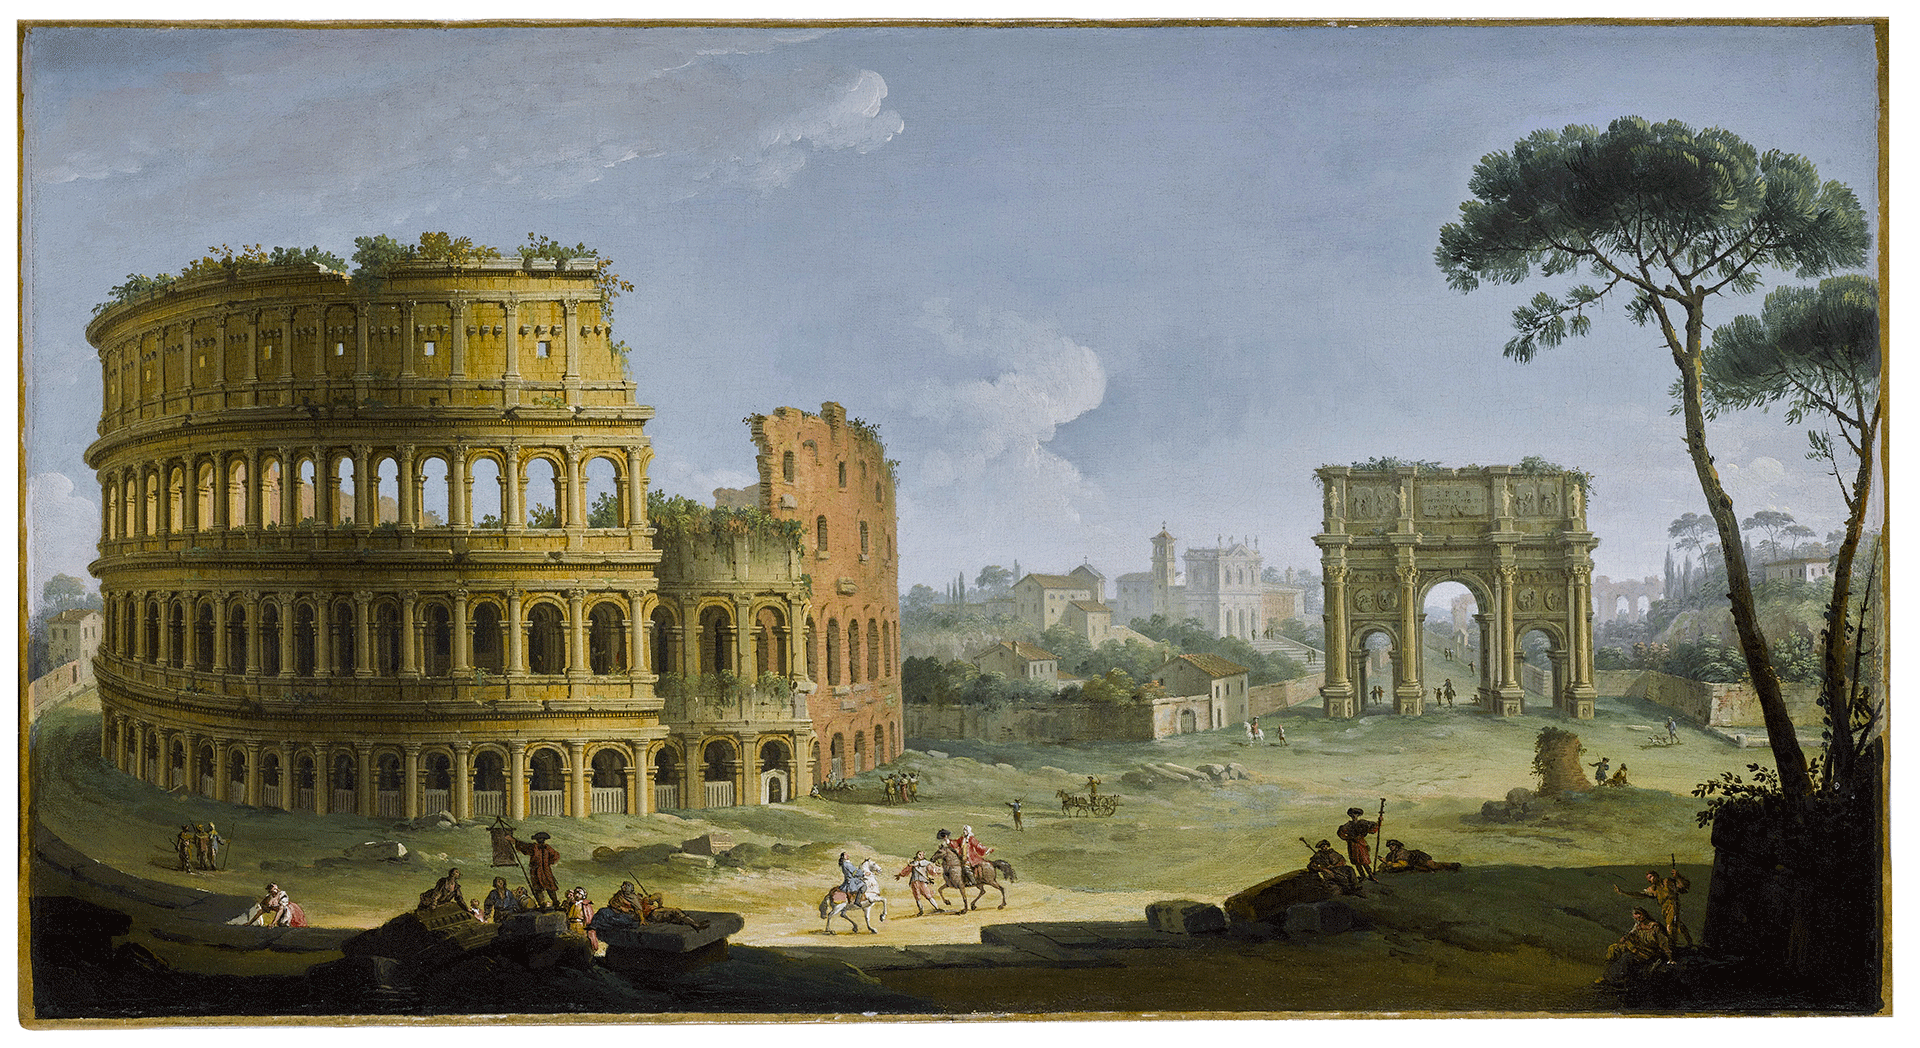 Rome, A view of the Colosseum and the Arch of Constantine